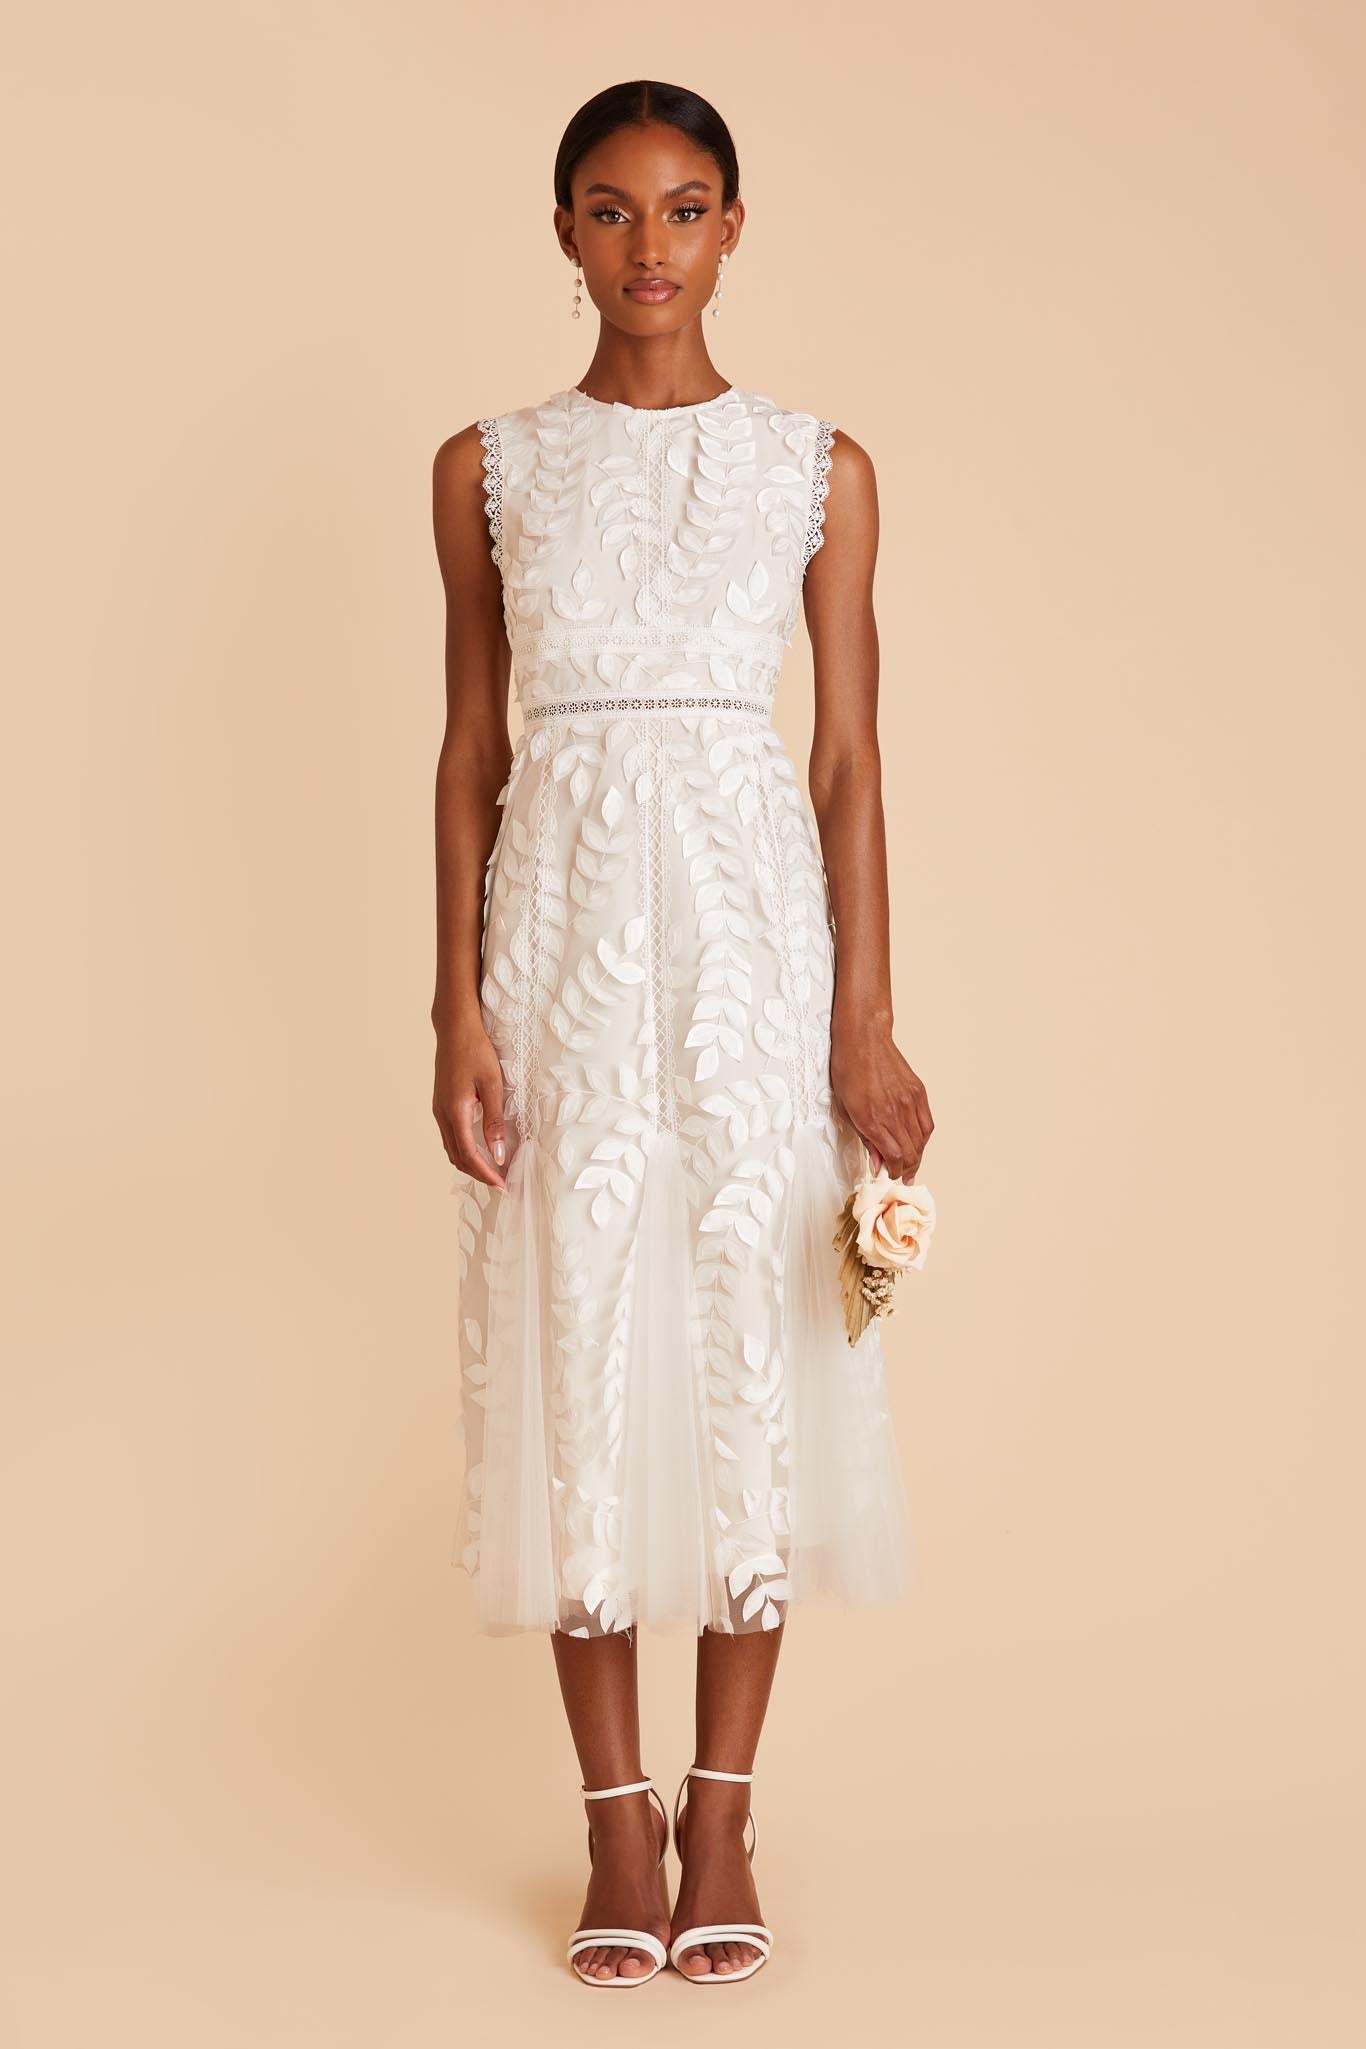 White Embroidered Empire Waist Dress by Birdy Grey